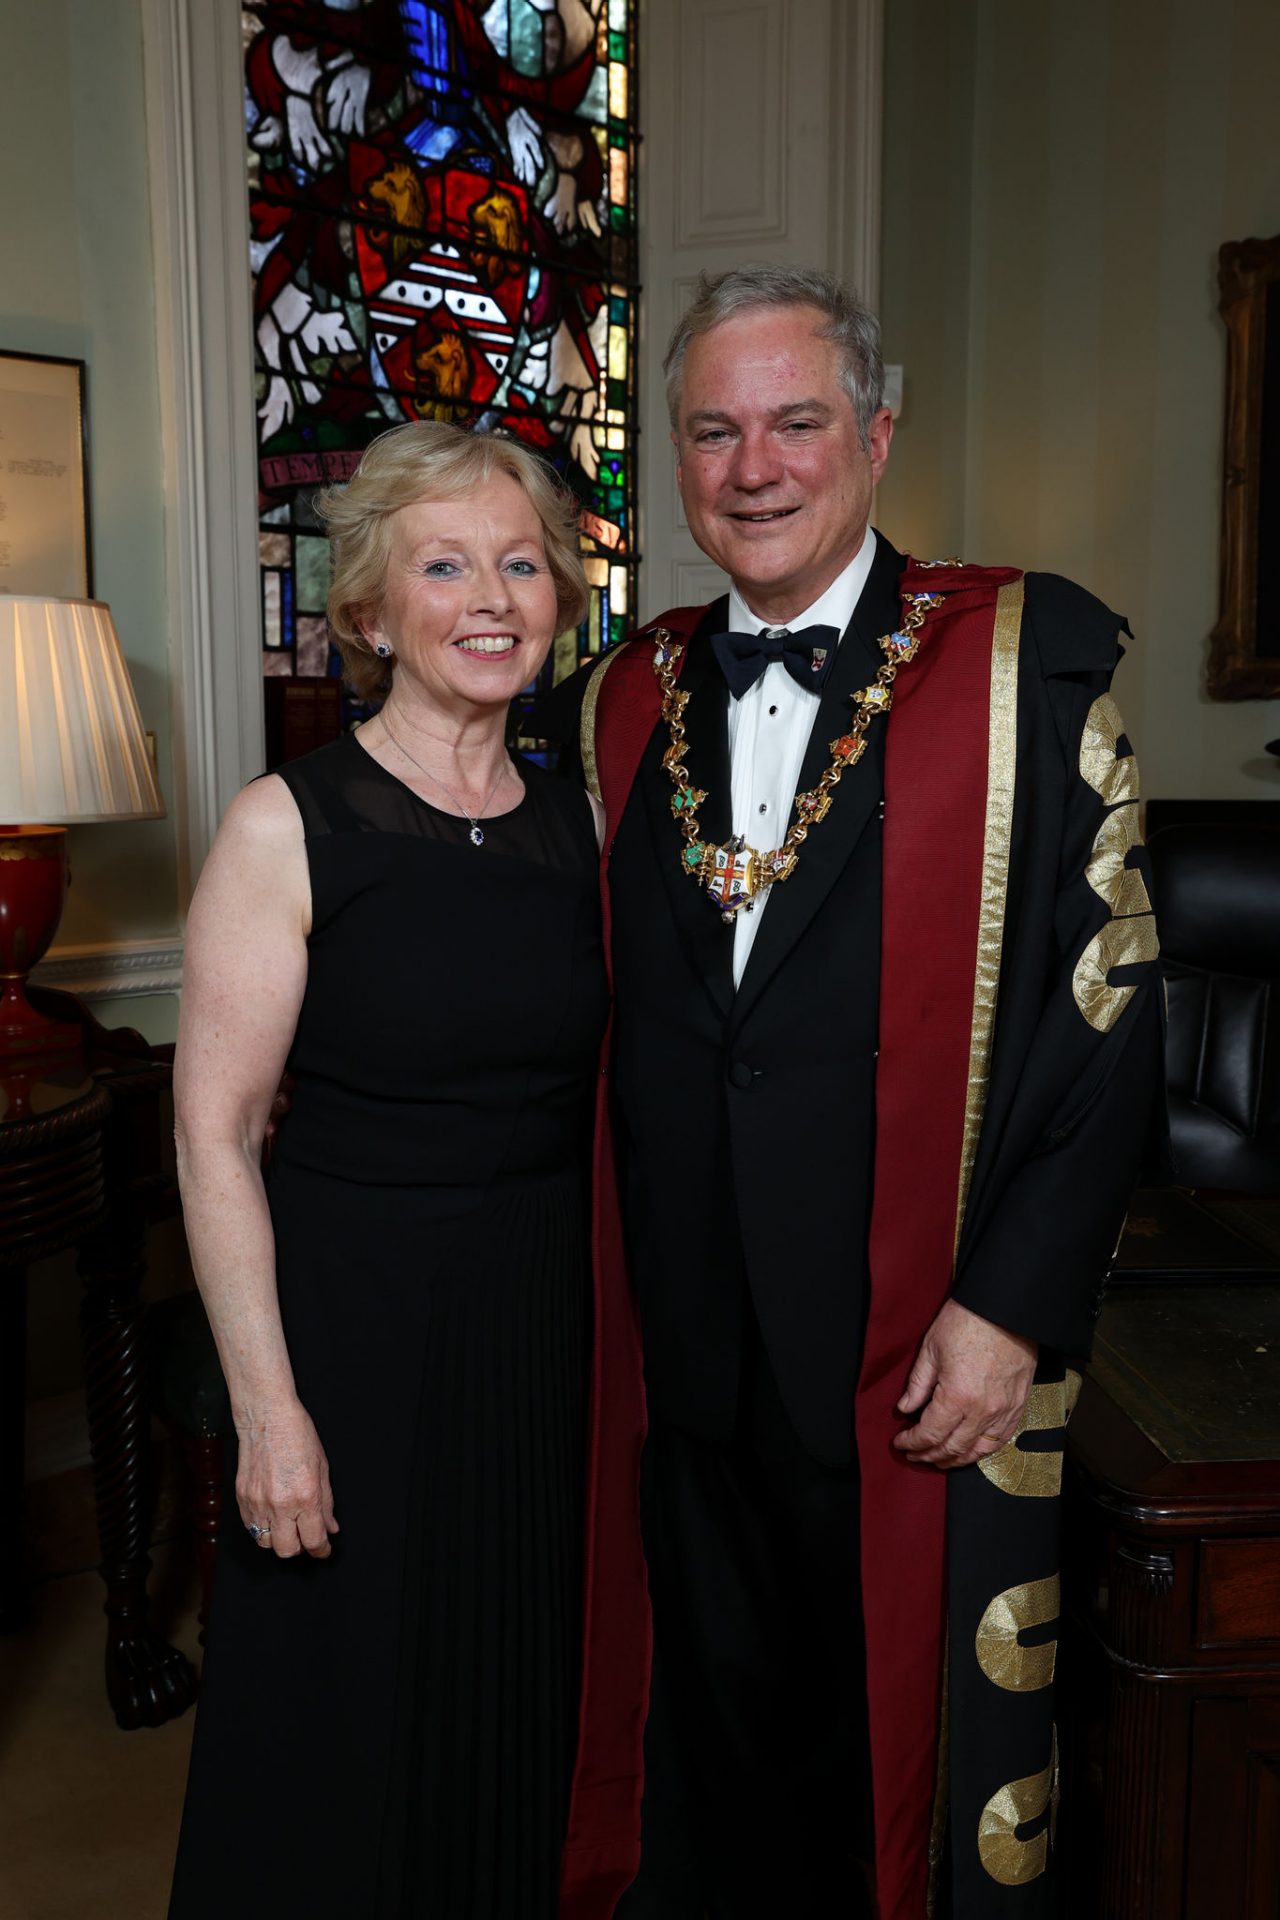 Dr. Ronan O’Connell, right, with his wife Pauline